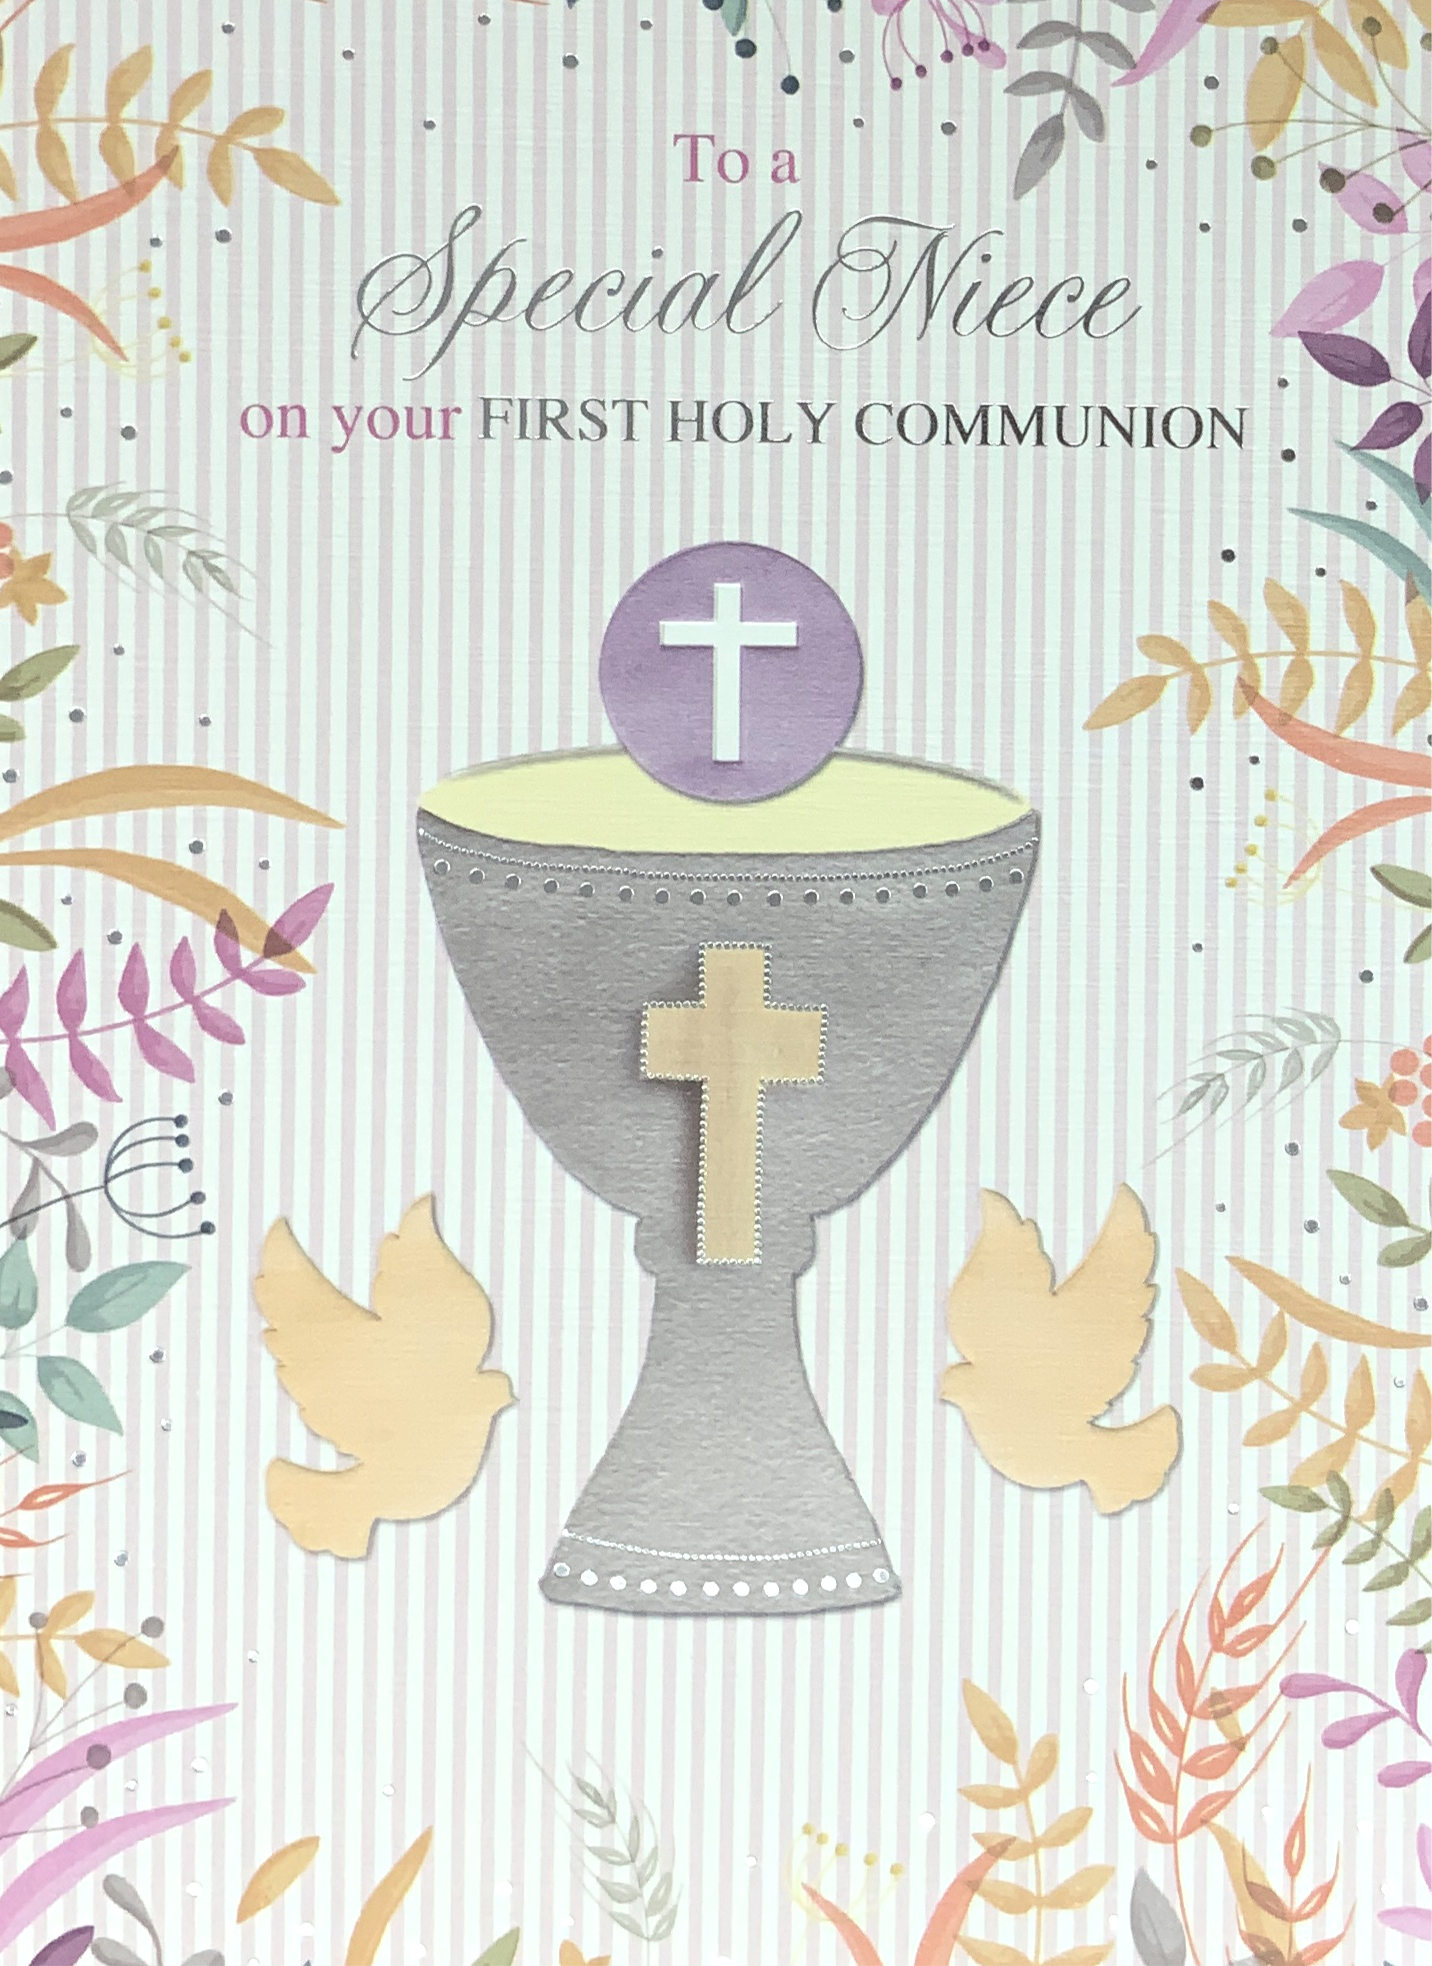 Communion Card - Niece / May All Your Dreams Come True